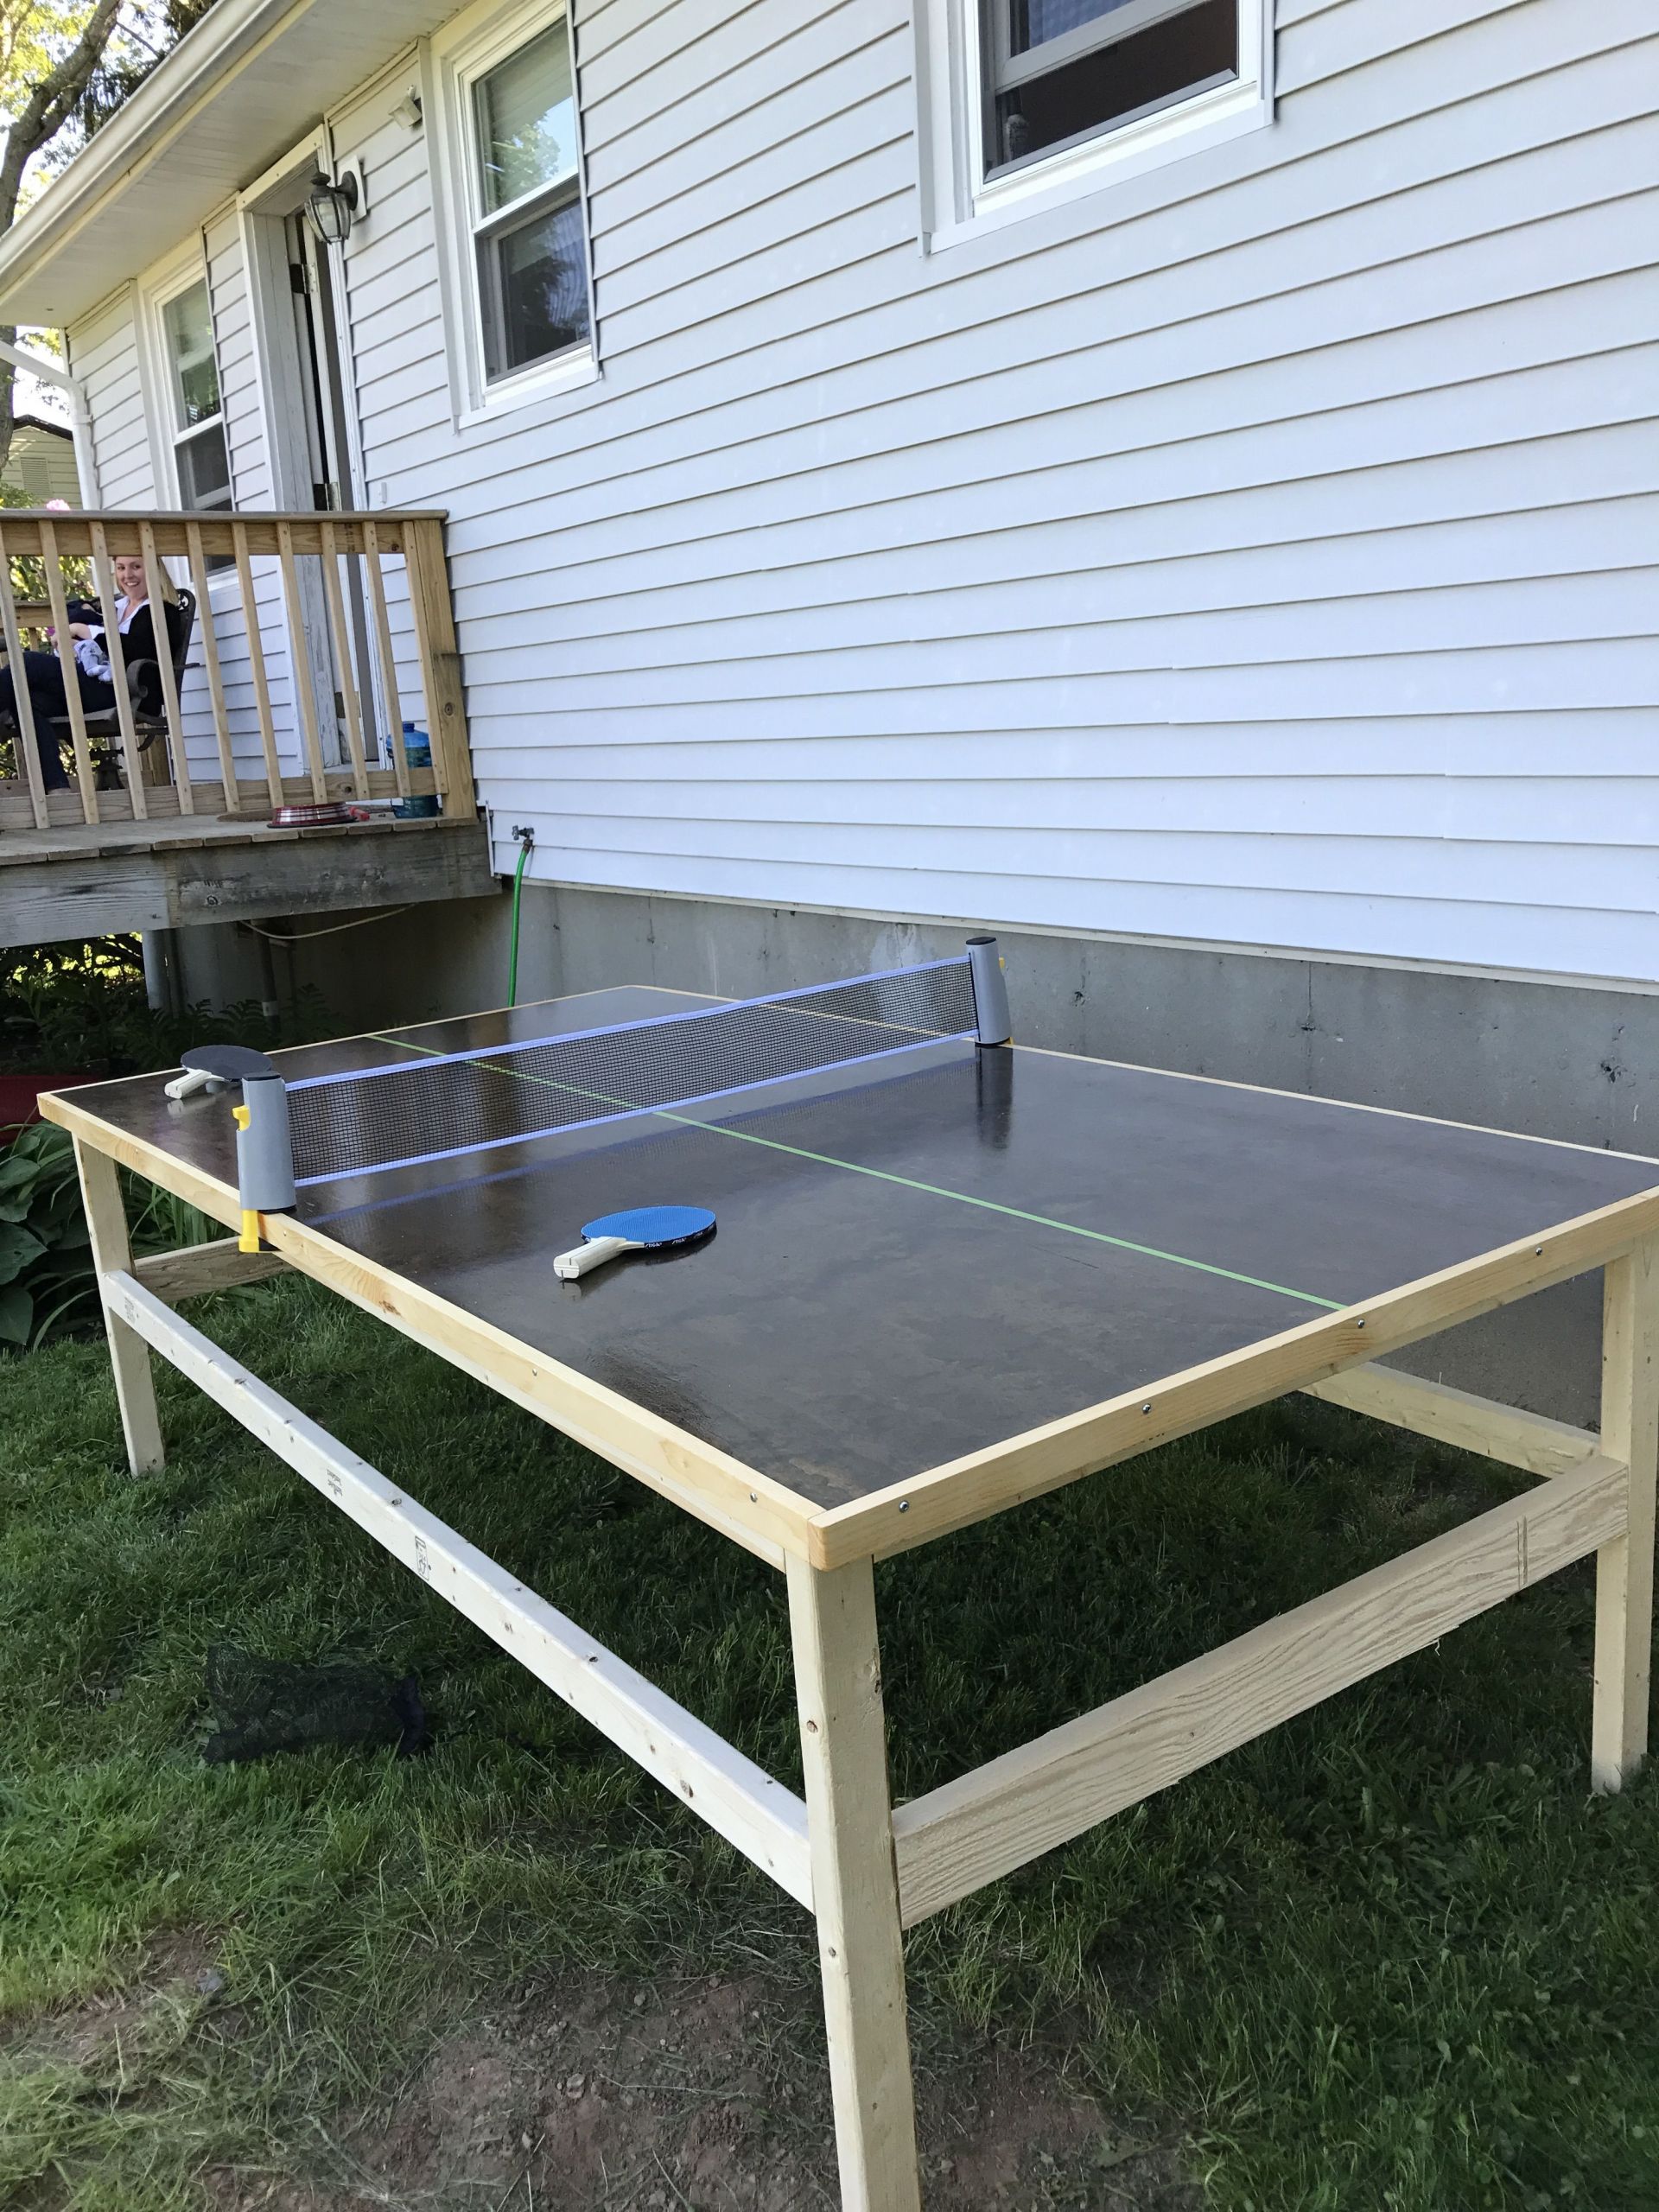 DIY Outdoor Ping Pong Table
 Diy ping pong table used the Kreg jig for the legs has